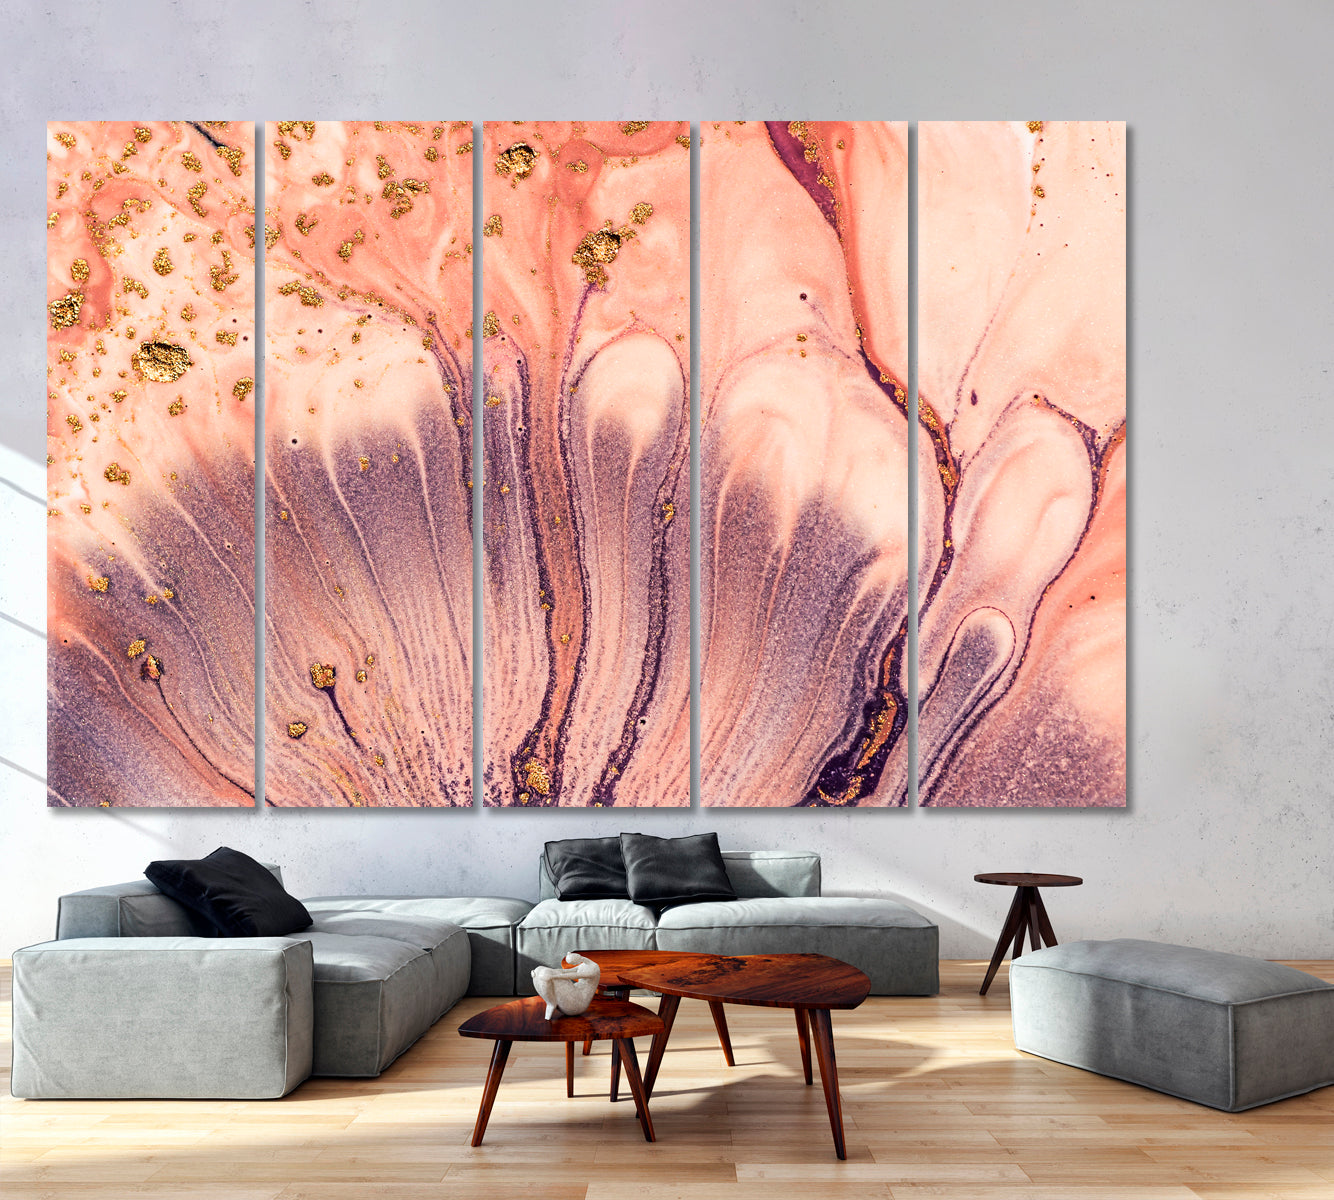 PEARL Pale Pink Powder And Lavender Purple With Gold Marble Pattern Fluid Art, Oriental Marbling Canvas Print Artesty 5 panels 36" x 24" 